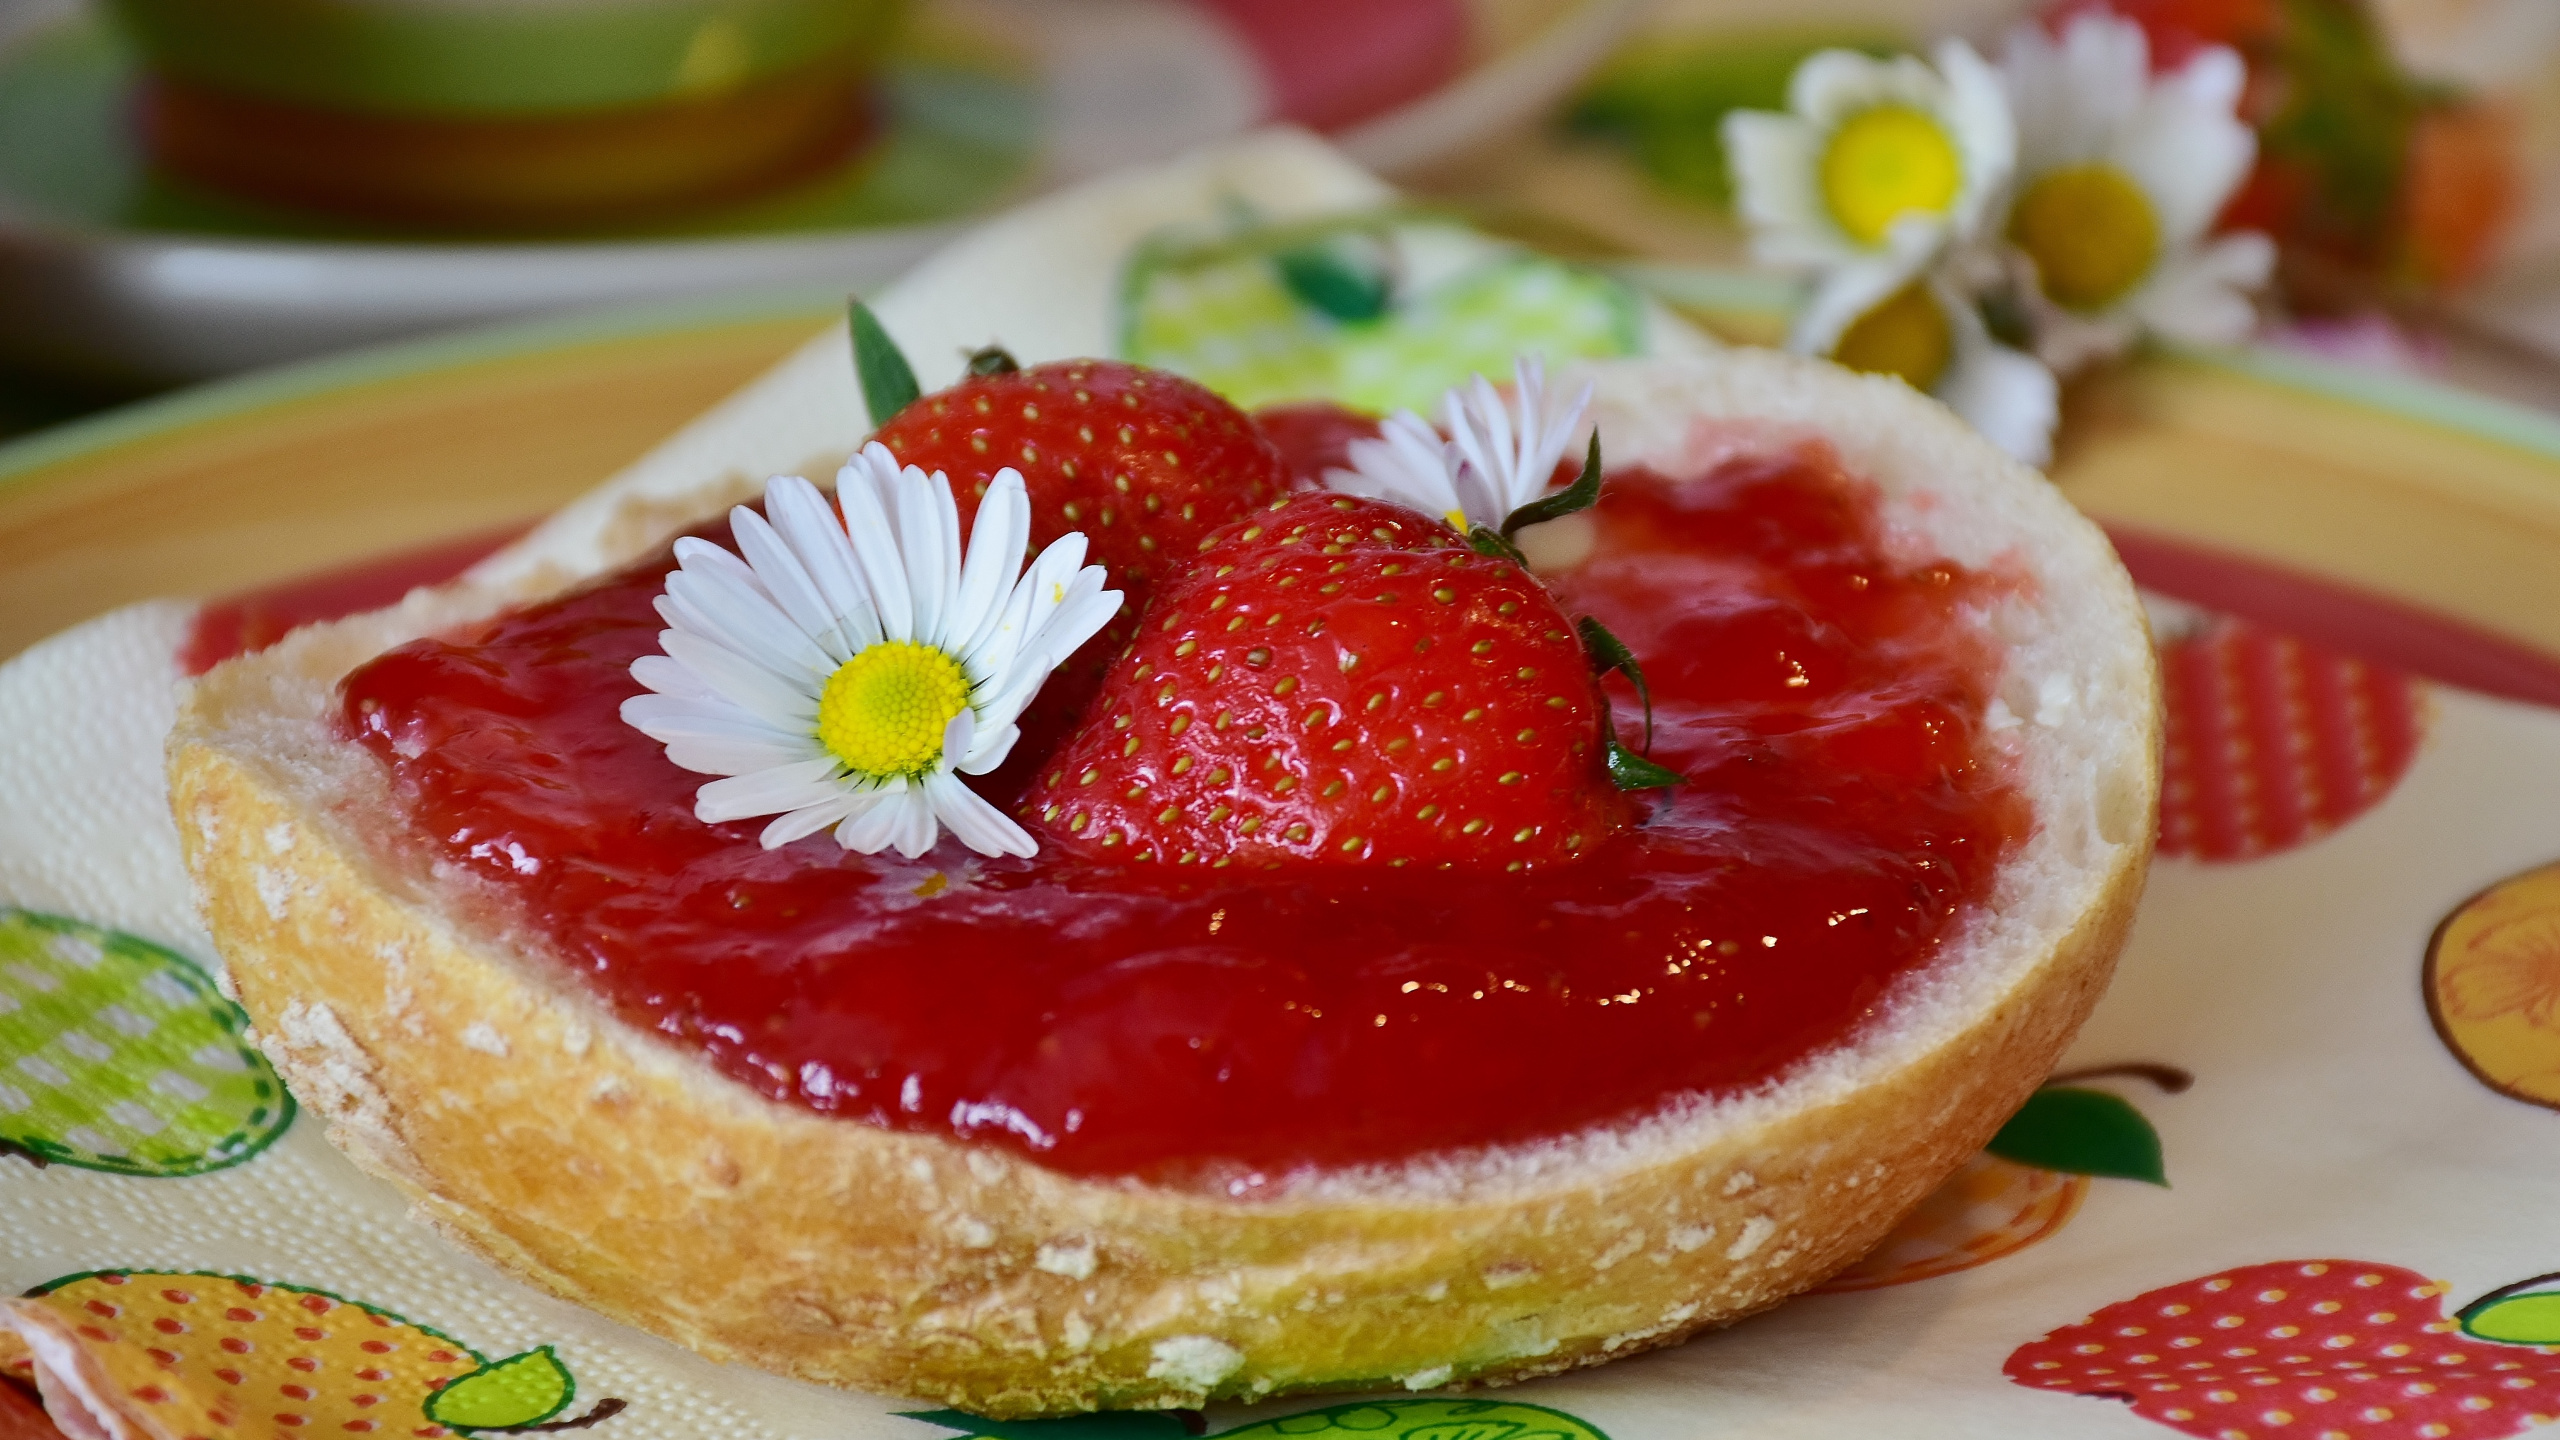 Strawberry on Bread With Cream on Top. Wallpaper in 2560x1440 Resolution